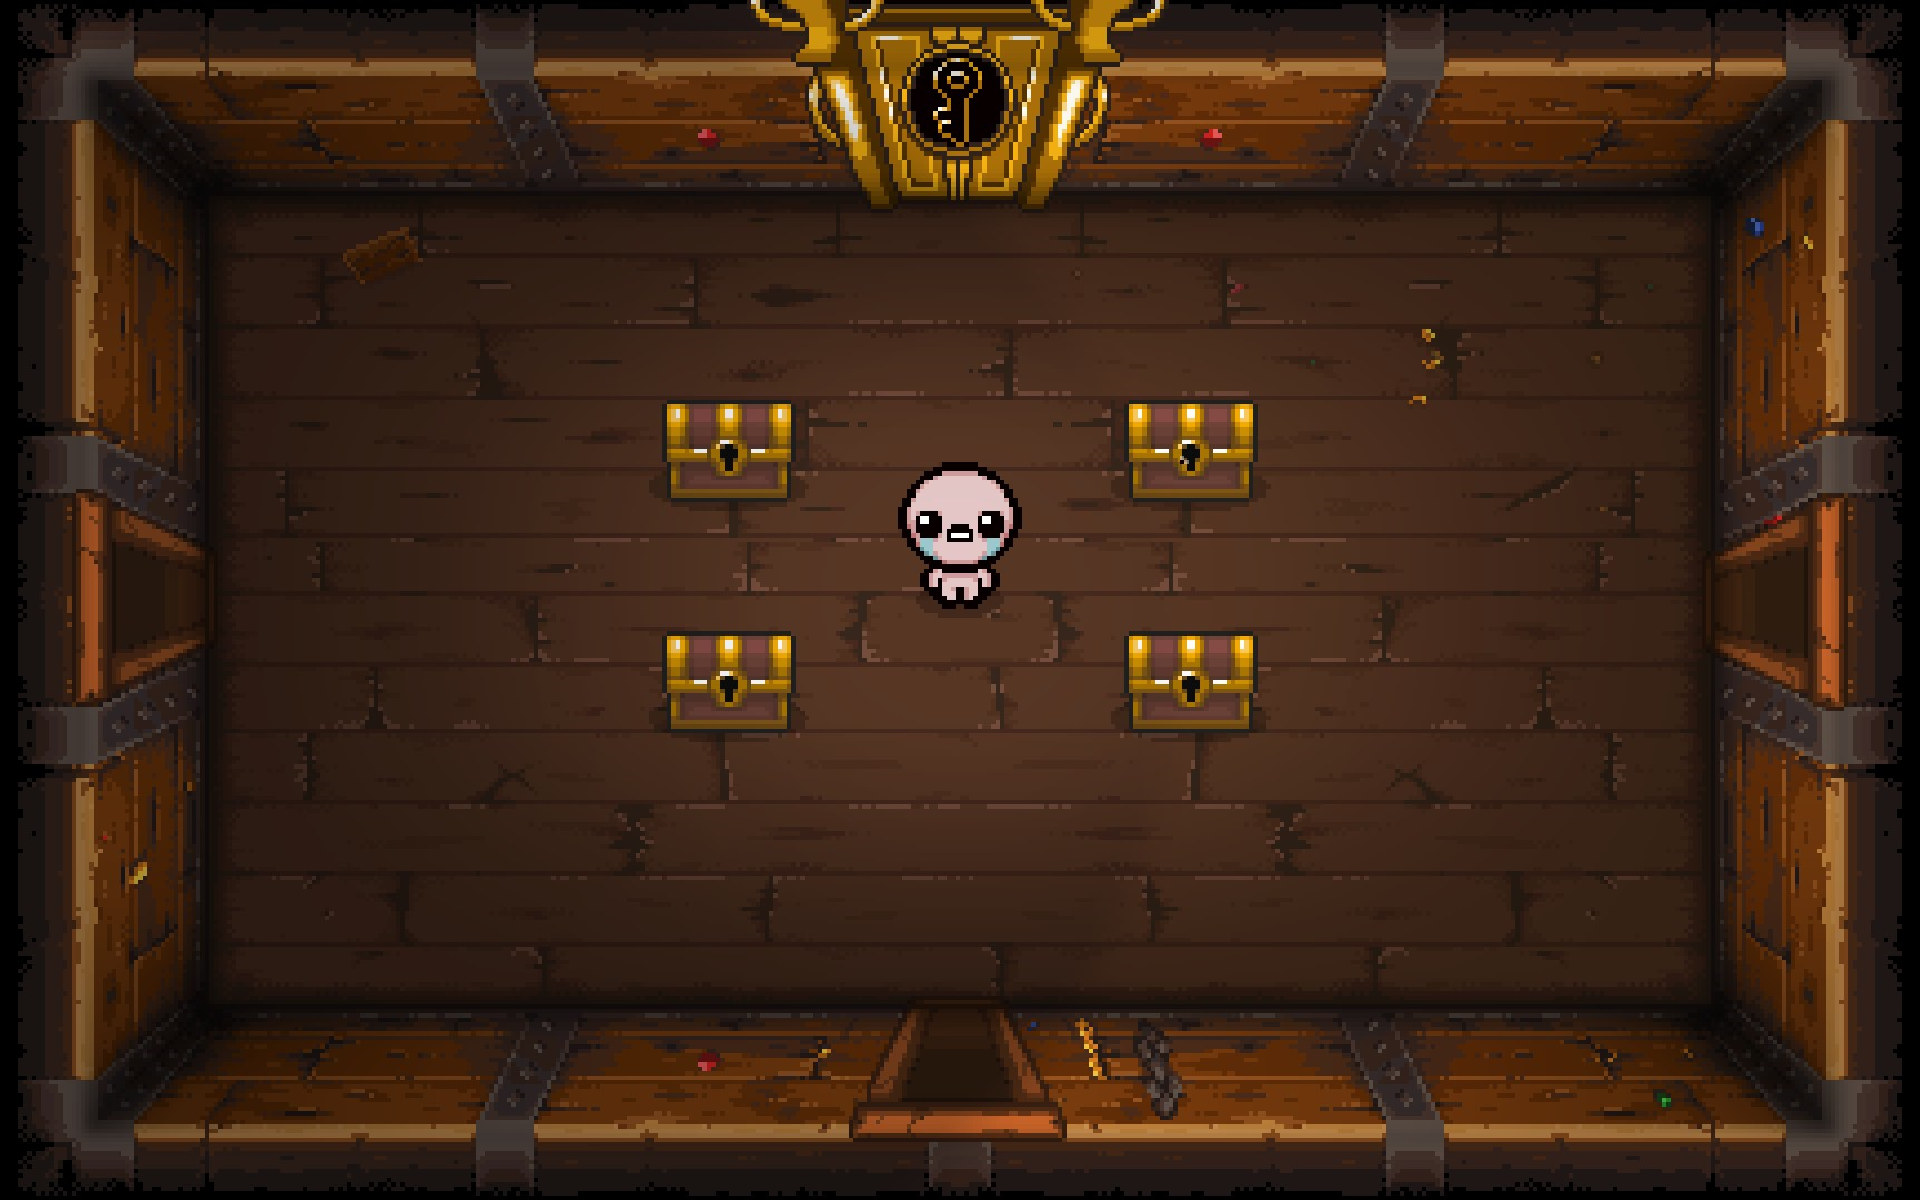 The Chest is one of five final levels in The Binding of Isaac, alongside th...